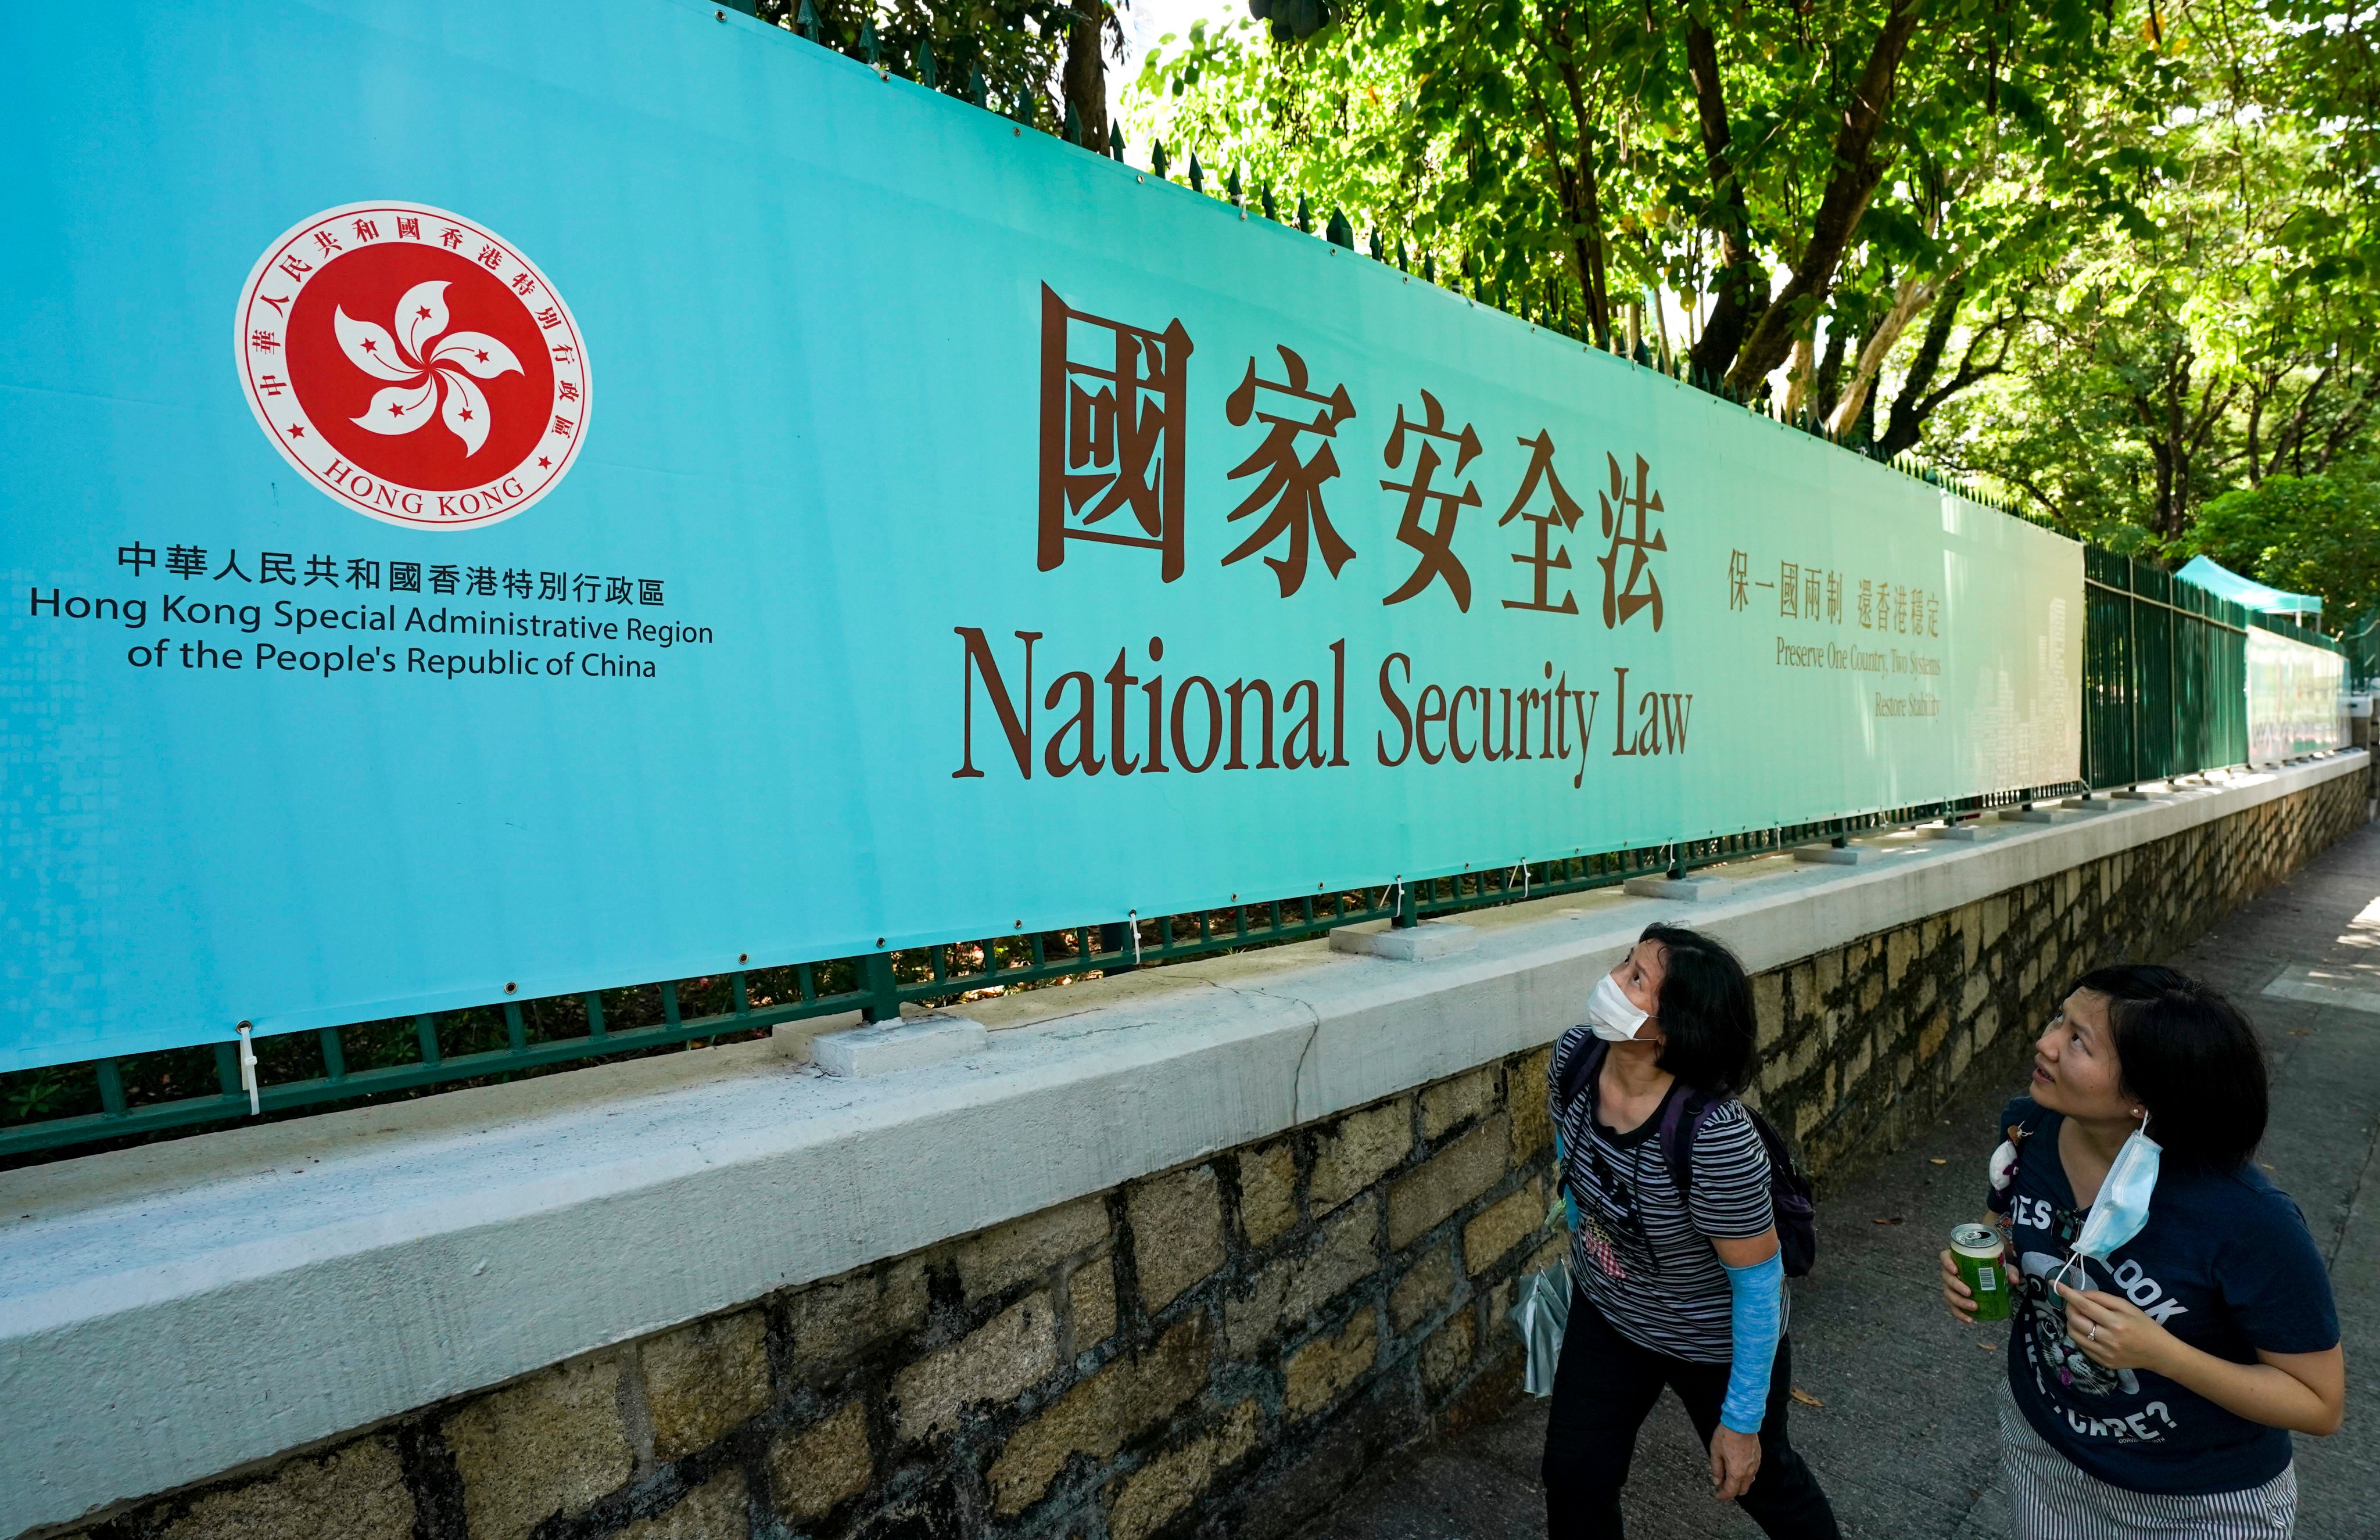 Britain says Hong Kong’s national security law has stifled freedoms in the city. Photo: Felix Wong